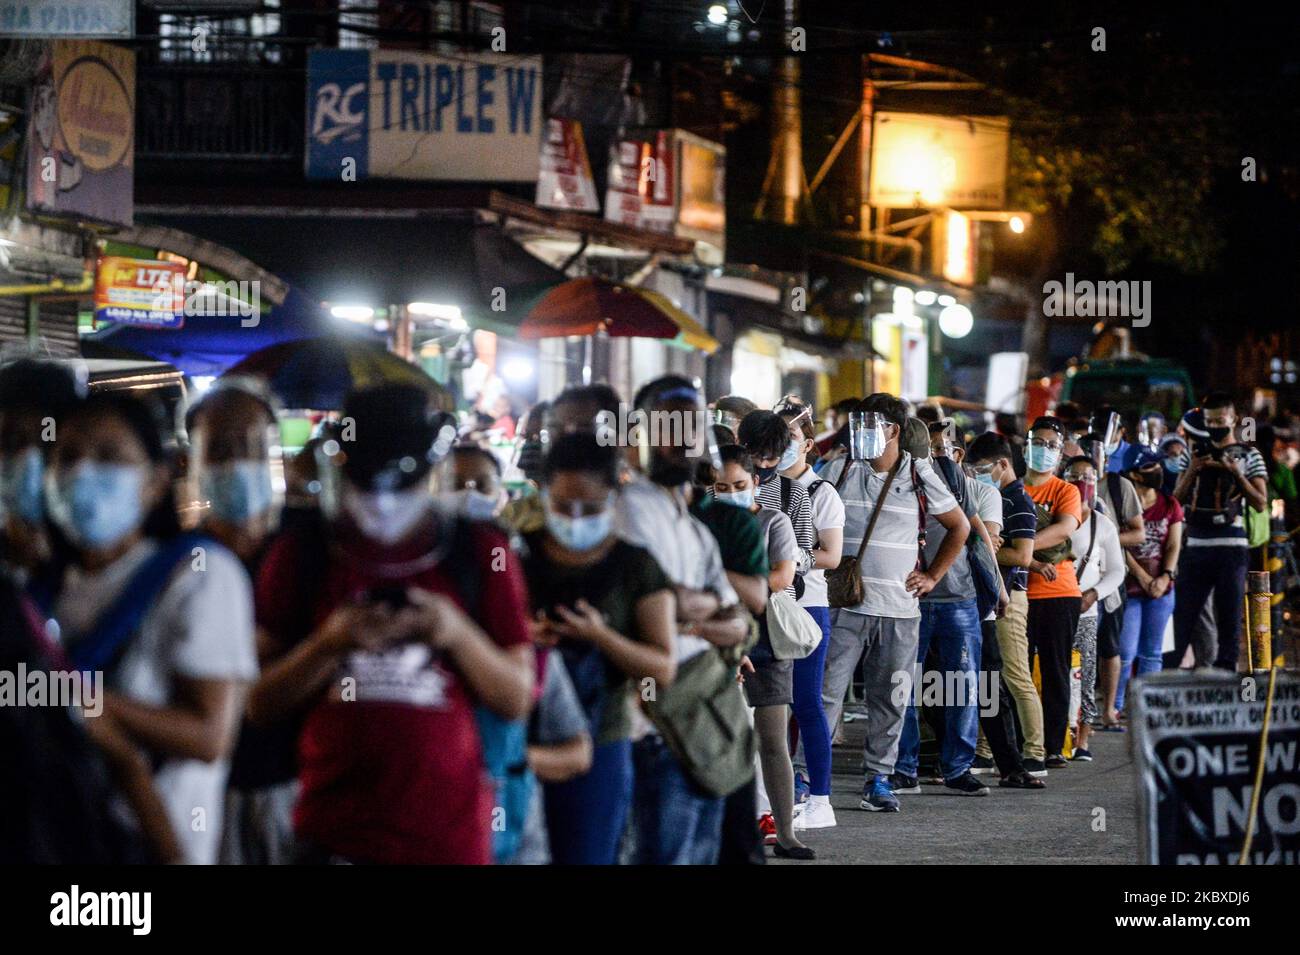 passengers wearing face masks and face shields queue at a bus terminal in quezon city philippines on august 22 2020 the total number of covid 19 cases in the philippines rose to 187249 after 4933 new cases have been recordedphoto by lisa marie davidnurphoto 2KBXDJ6